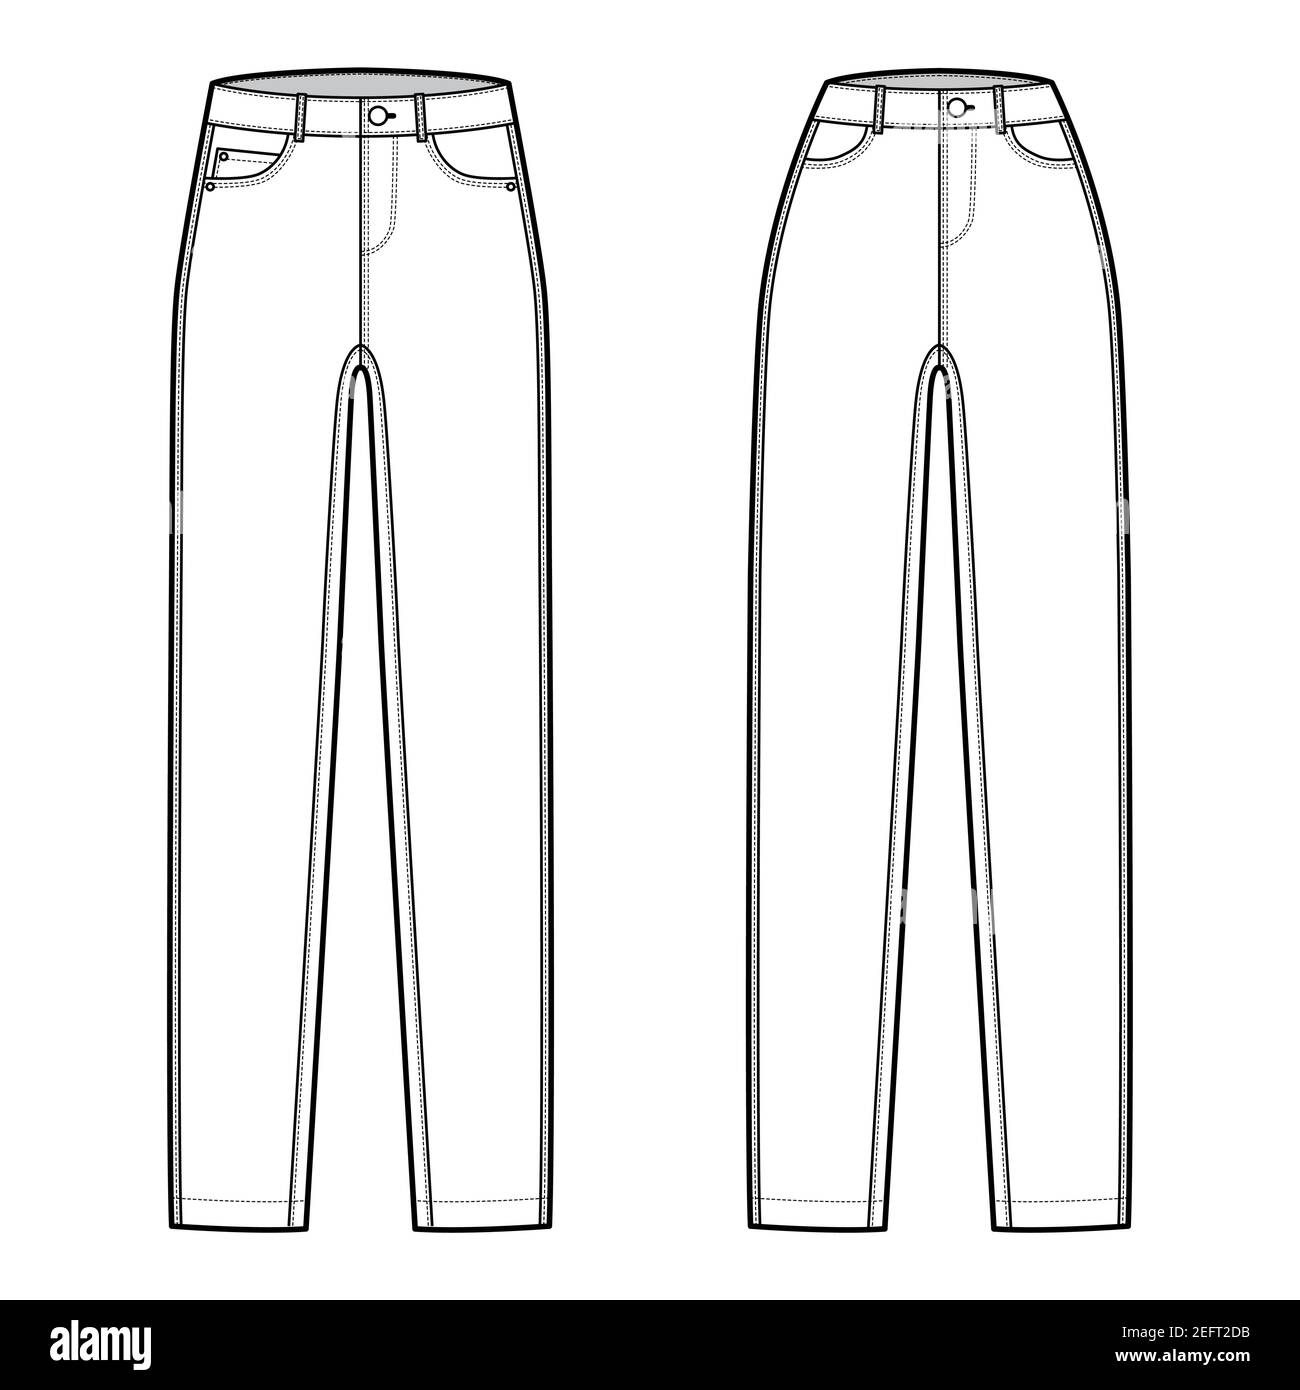 Set of Skinny Jeans Denim pants technical fashion illustration with full length, normal waist, high rise, 5 pockets, Rivets. Flat bottom template front, white color style. Women, men CAD mockup Stock Vector